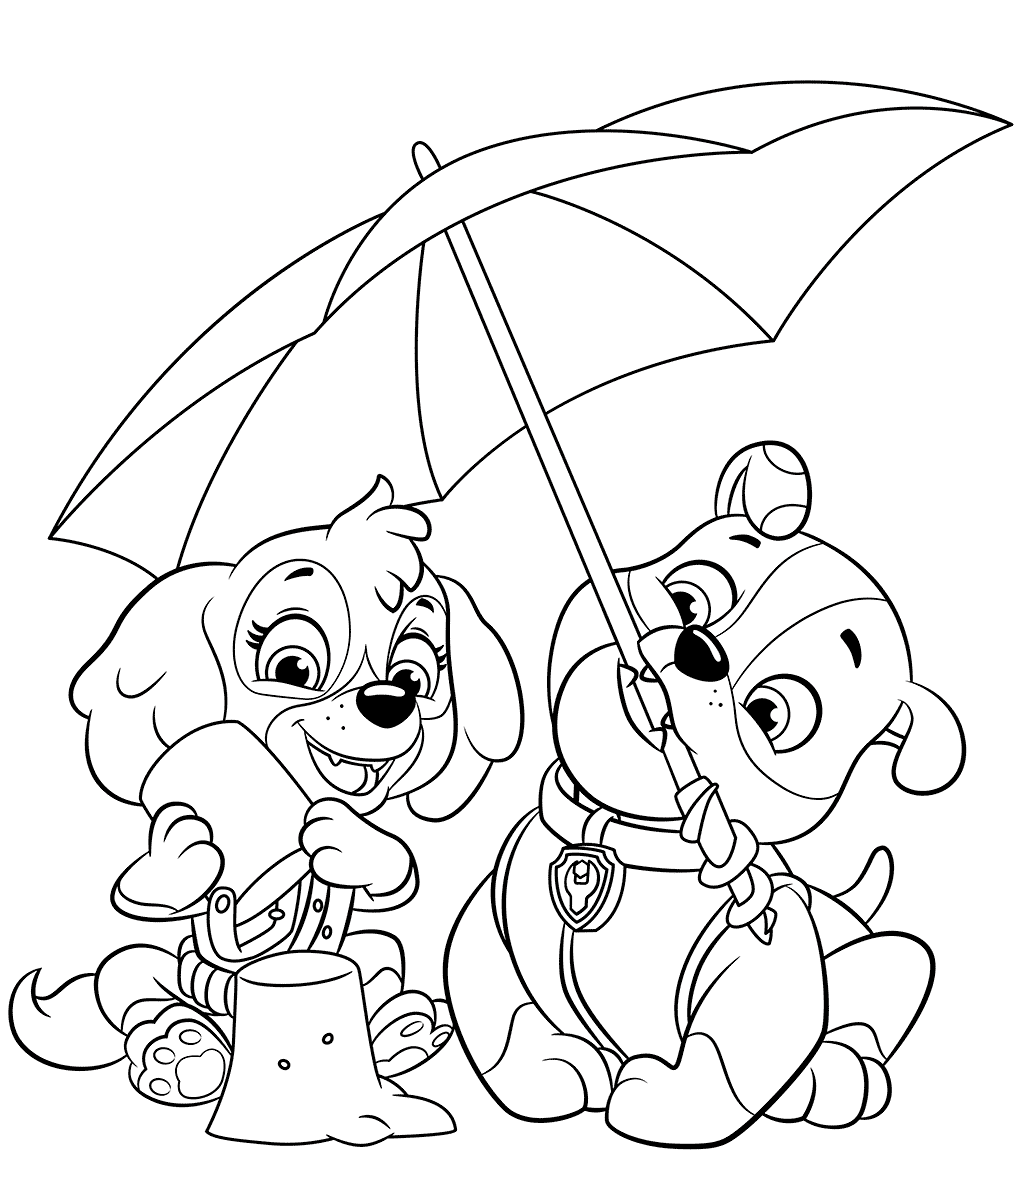 Summer PAW Patrol Rubble And Skye Coloring Page